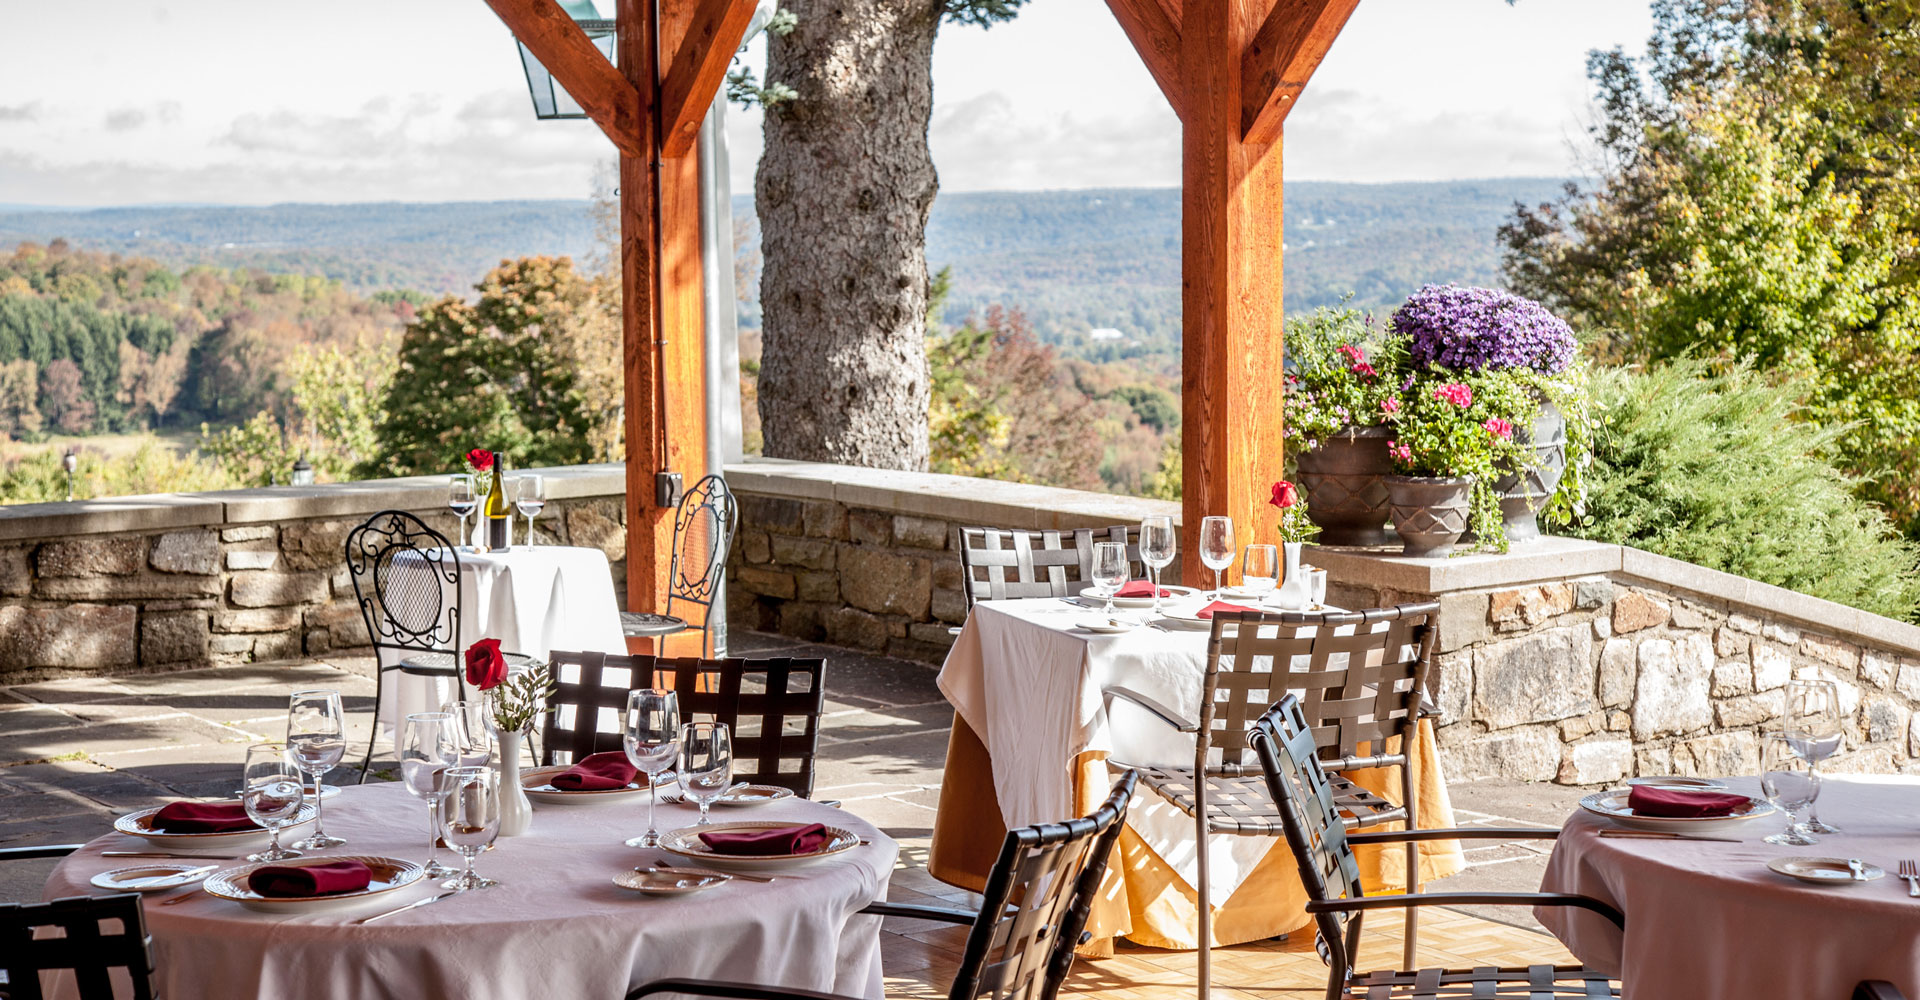 The French Manor Inn & Restaurant's fine dining experience makes it one of the best places to travel for food.